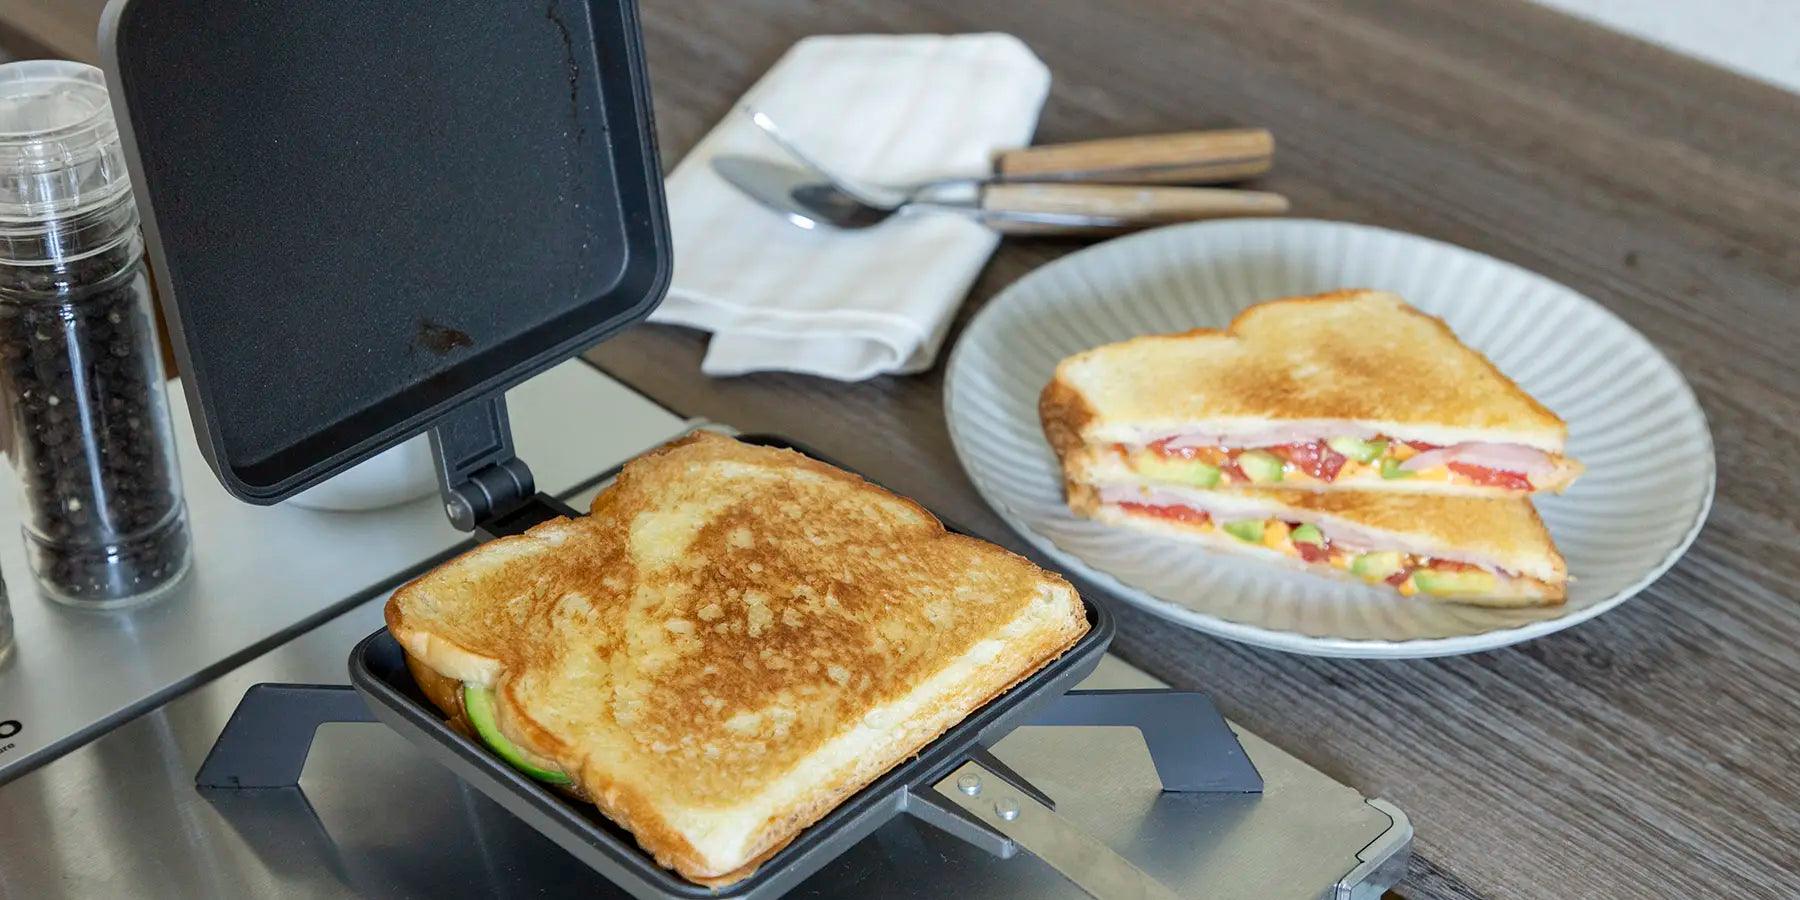 Discover our great selection of Sandwich Makers at Globalkitchen Japan.